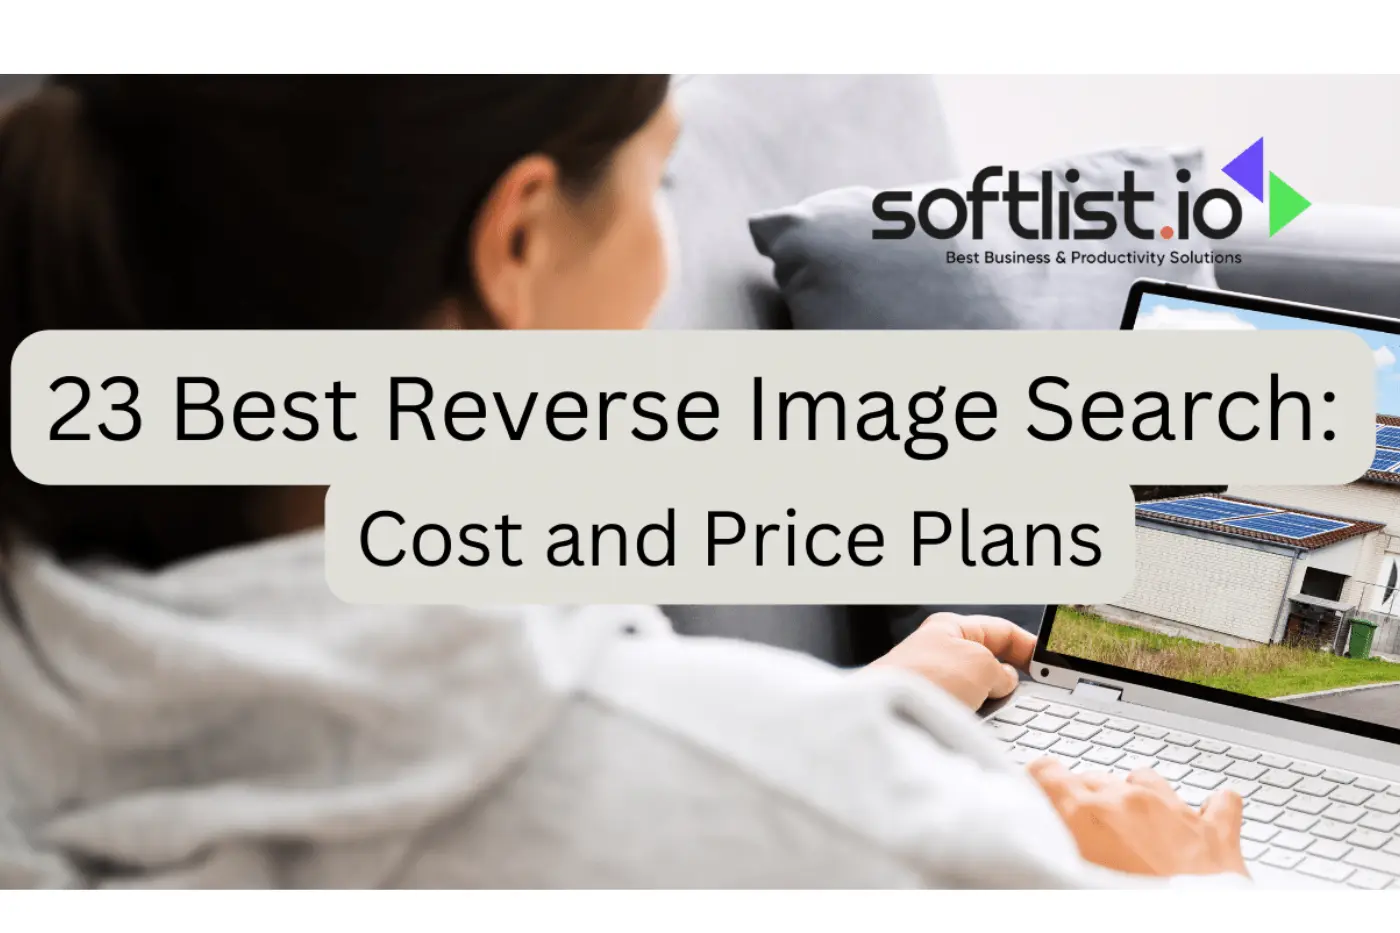 23 Best Reverse Image Search: Cost and Price Plans